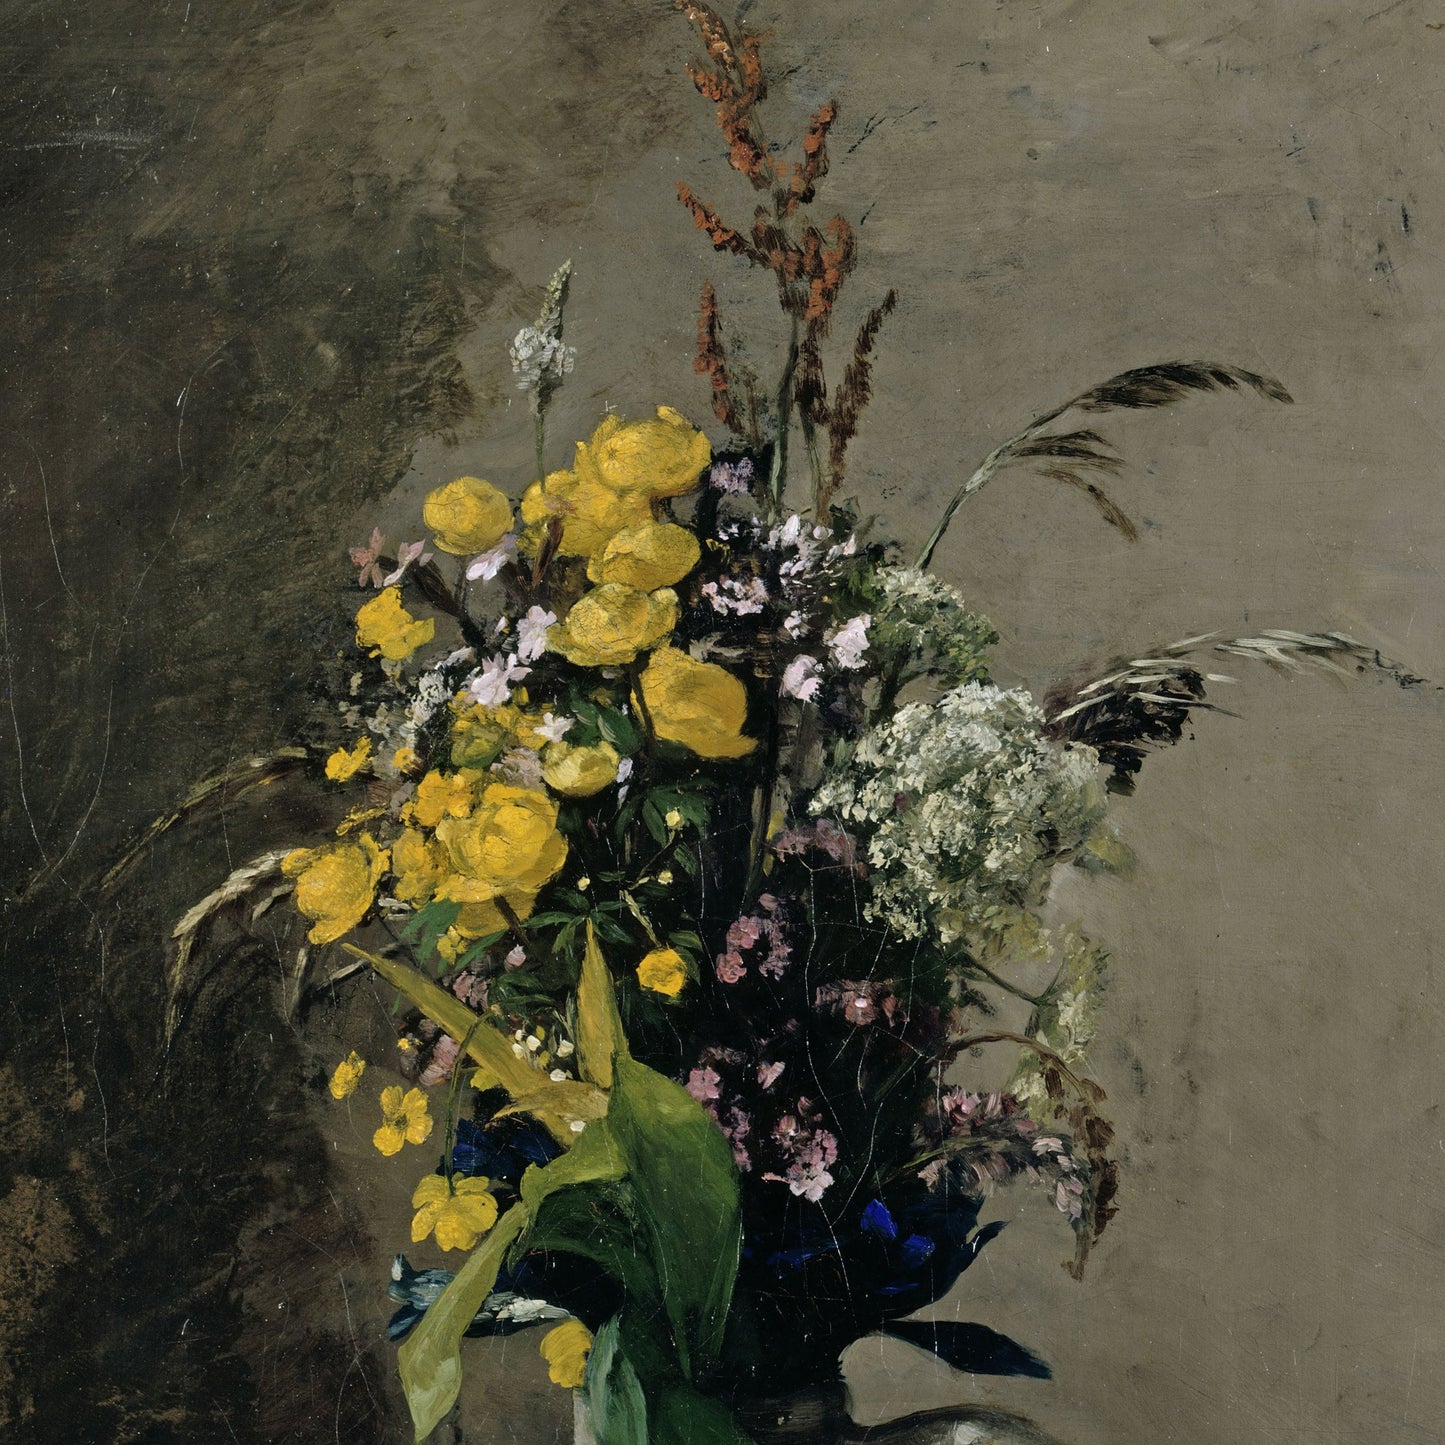 Bouquet of Wild Flowers by Hans Thoma, 3d Printed with texture and brush strokes looks like original oil-painting, code:418